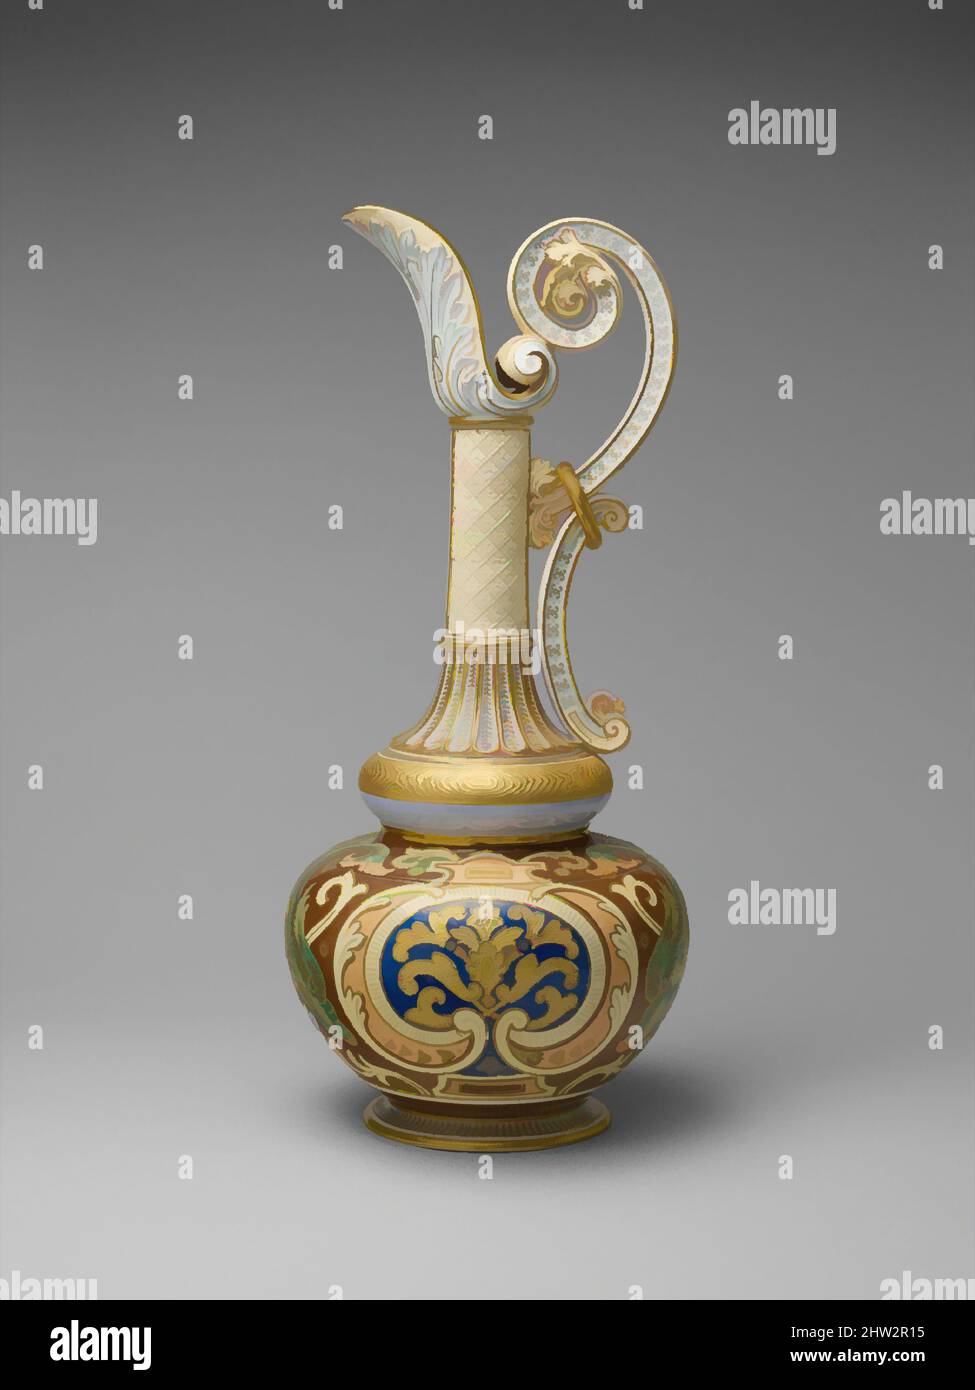 Art inspired by Ewer, 1886–90, Made in Brooklyn, New York, American, Cream-colored earthenware, H. 22 in. (55.9 cm), Ceramics, At 22 inches high, this ewer is one of the five largest known vessels produced by the Faience Manufacturing Company, and this example displays one of at least, Classic works modernized by Artotop with a splash of modernity. Shapes, color and value, eye-catching visual impact on art. Emotions through freedom of artworks in a contemporary way. A timeless message pursuing a wildly creative new direction. Artists turning to the digital medium and creating the Artotop NFT Stock Photo